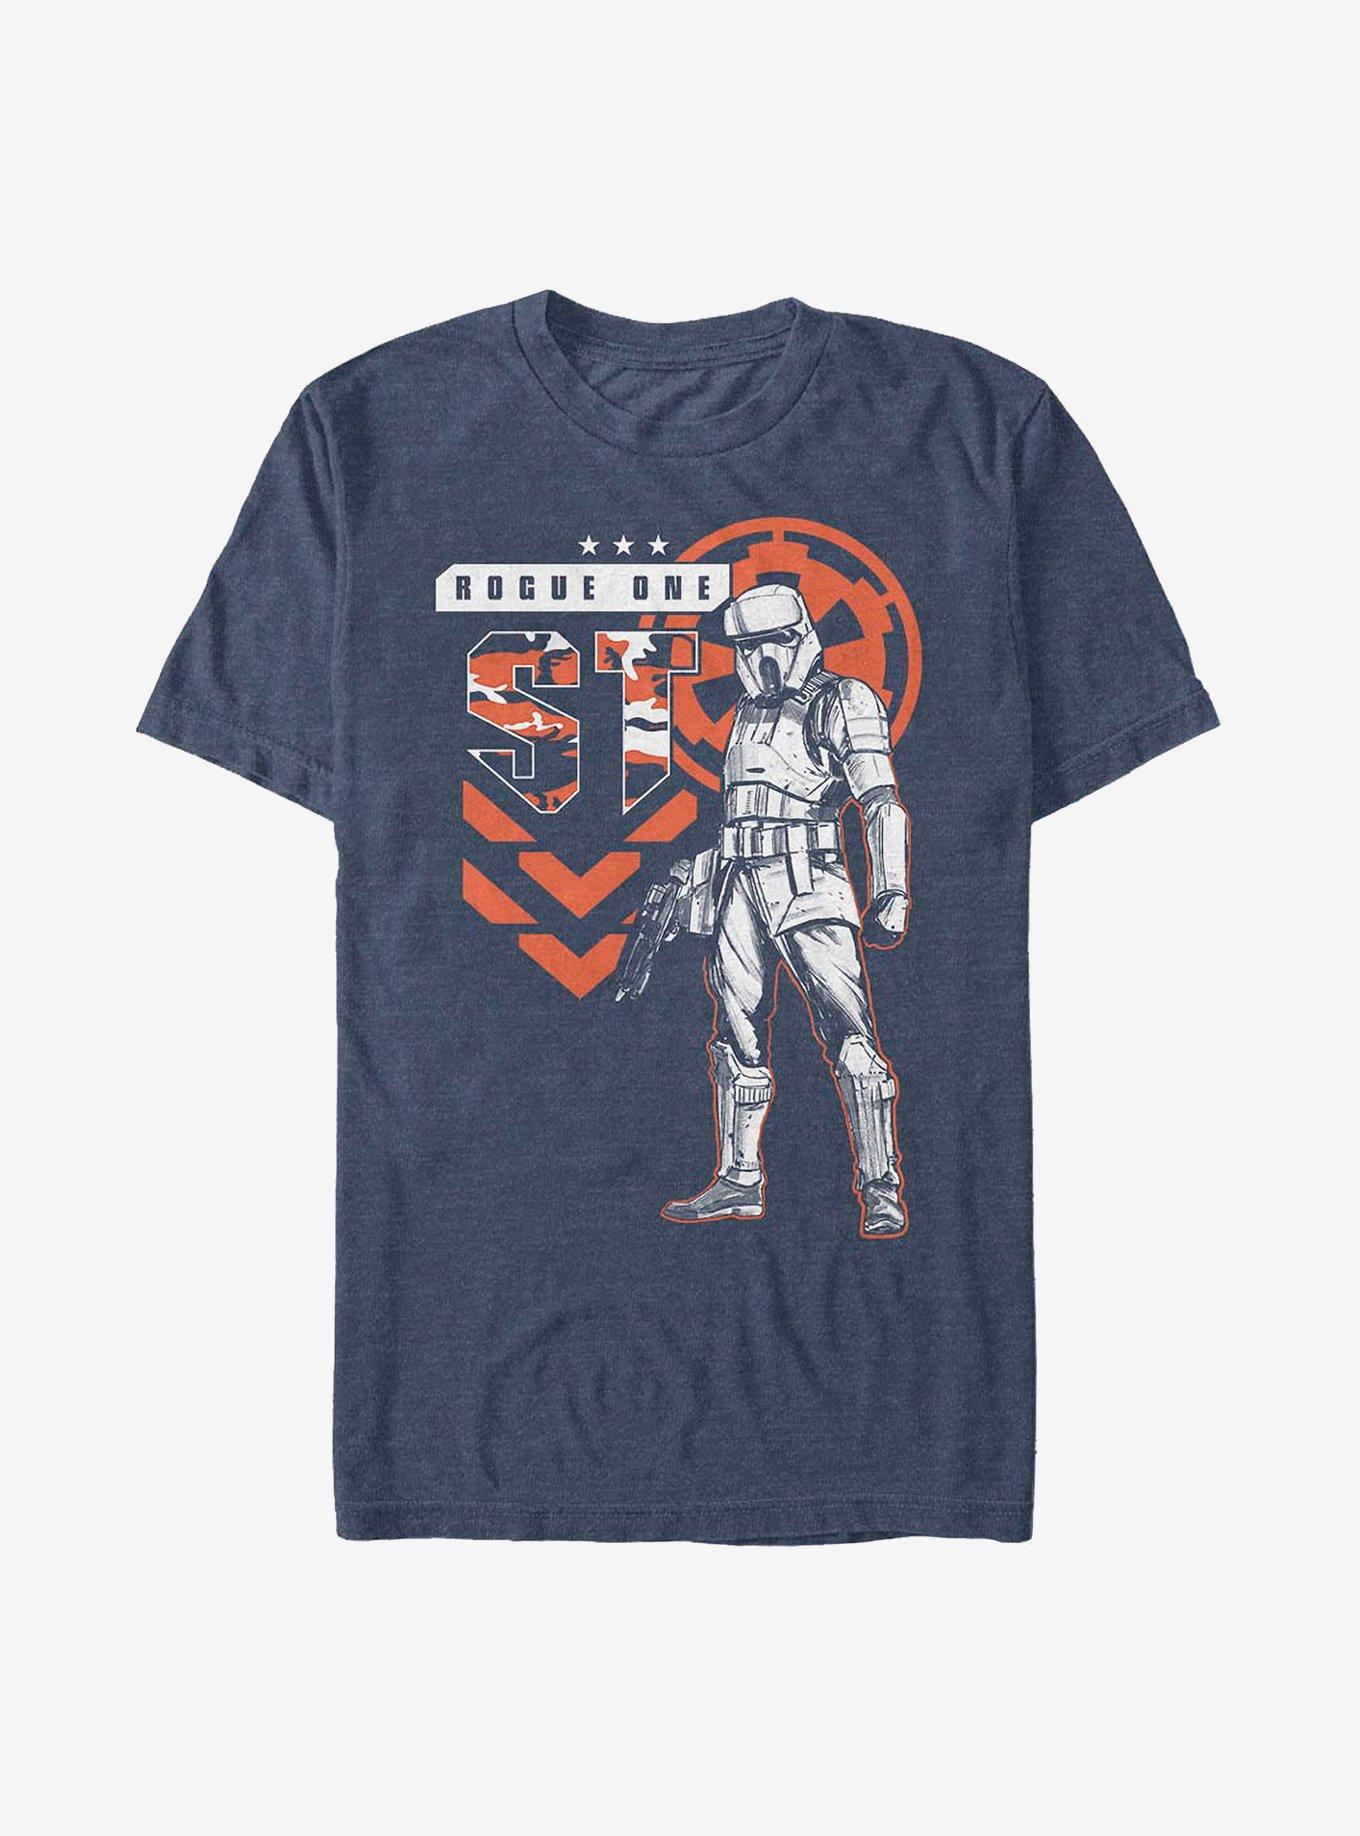 Star Wars Rogue One: A Star Wars Story Rogue One T-Shirt, NAVY HTR, hi-res